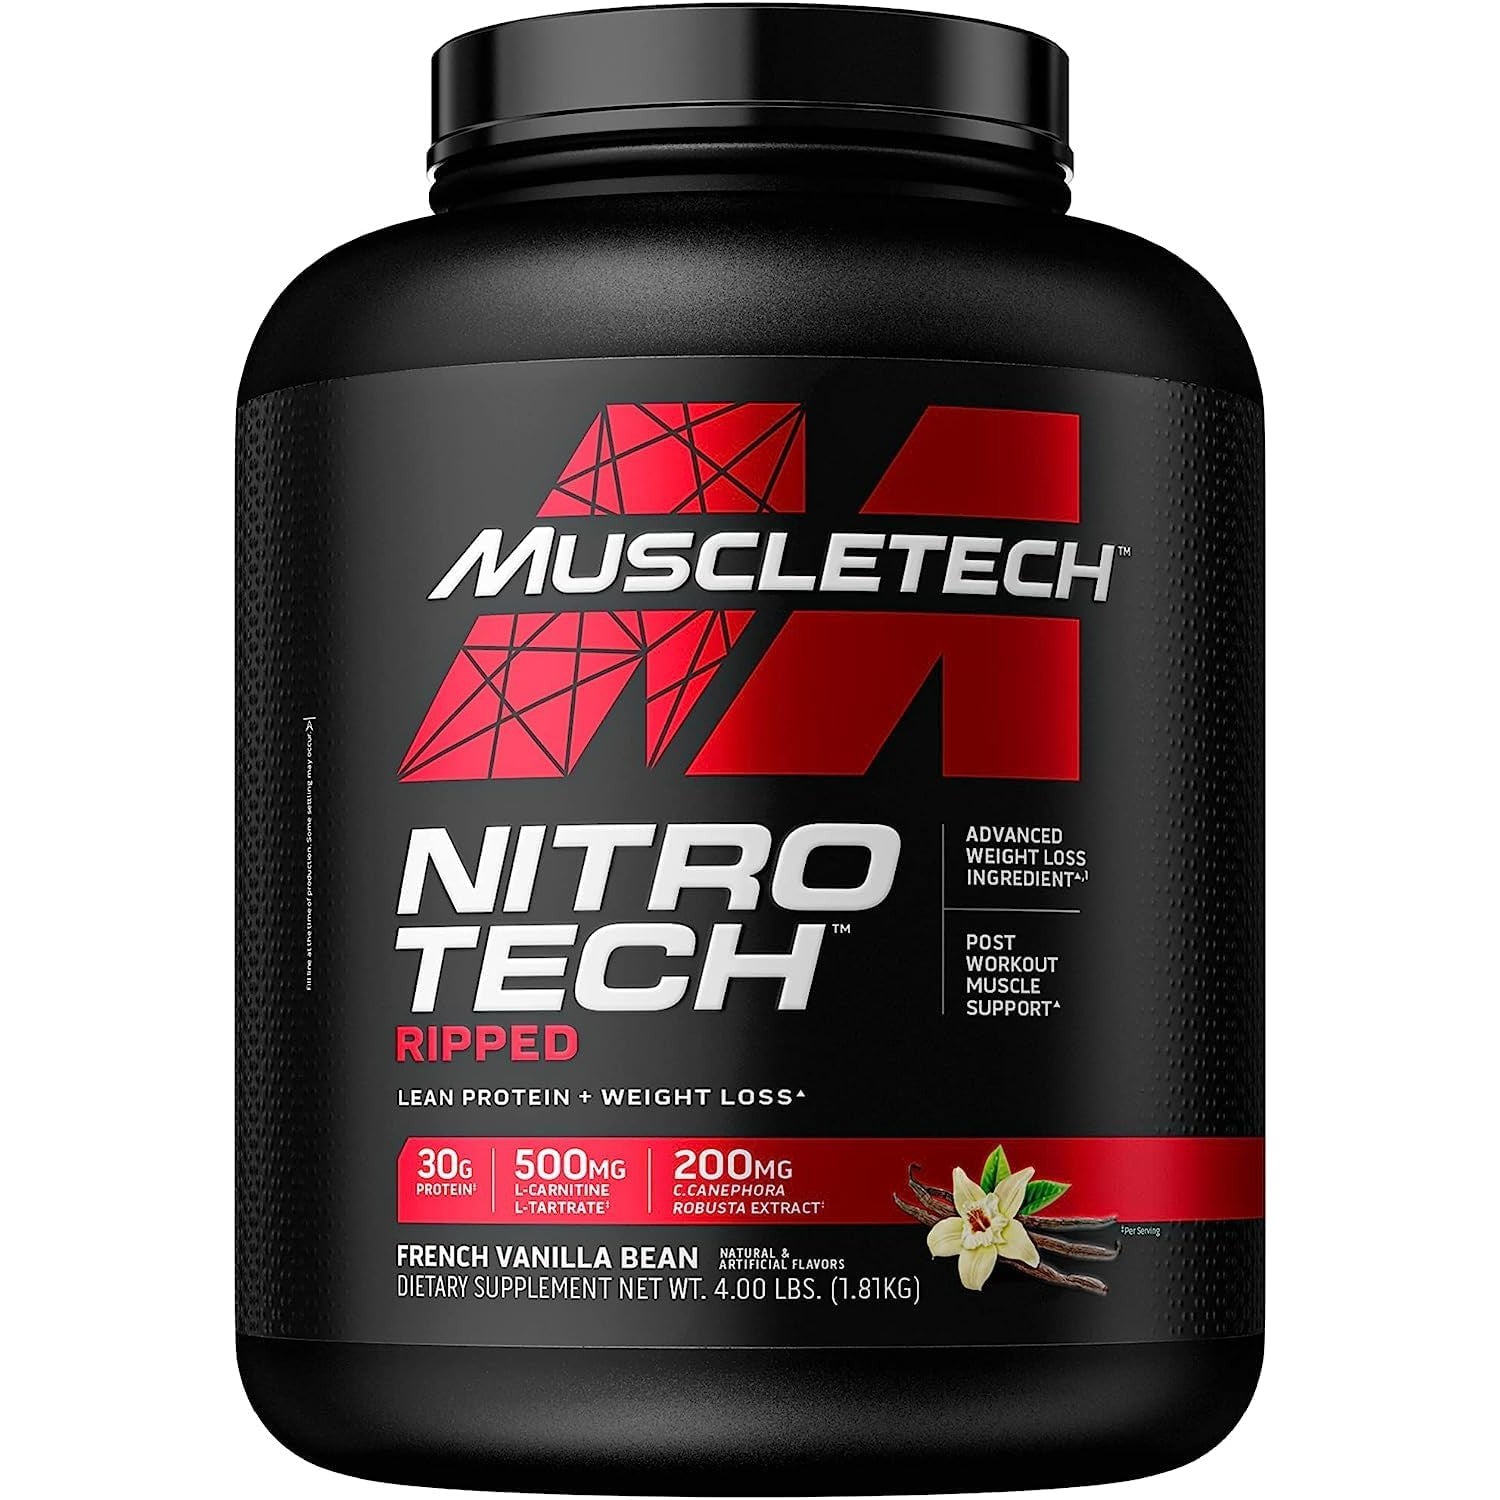 MuscleTech Nitro-Tech Ripped | Lean Protein + Weight Loss | Isolate, Concentrate & Peptides | 30g Protein 500mg L-Carnitine French Vanilla 1.82 KG